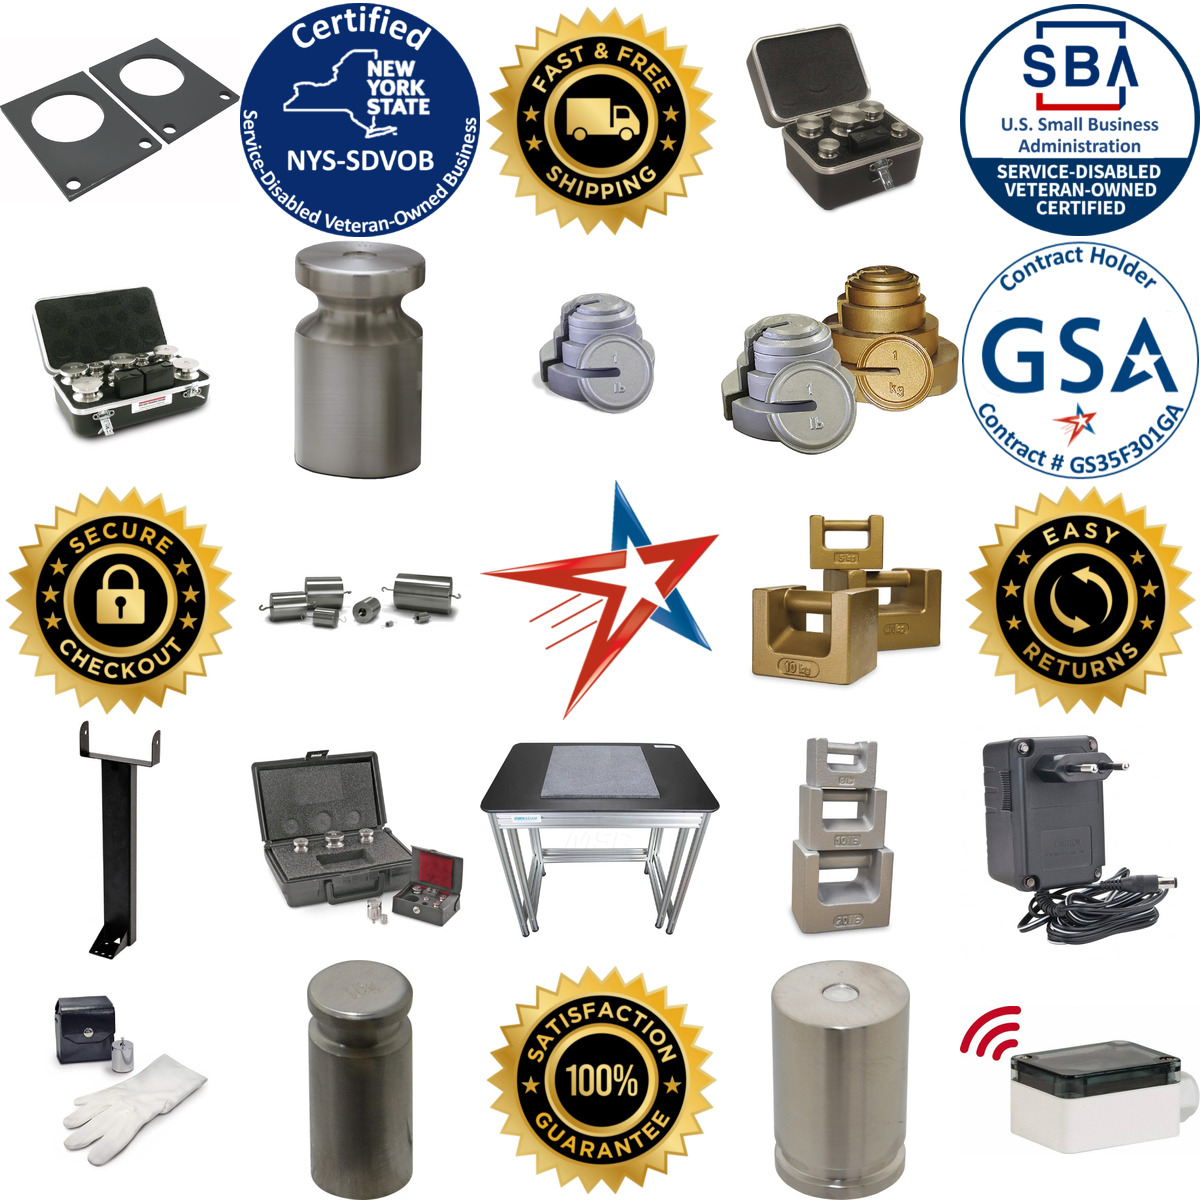 A selection of Scale Scoops Scale Calibration Masses and Scale Accessories products on GoVets